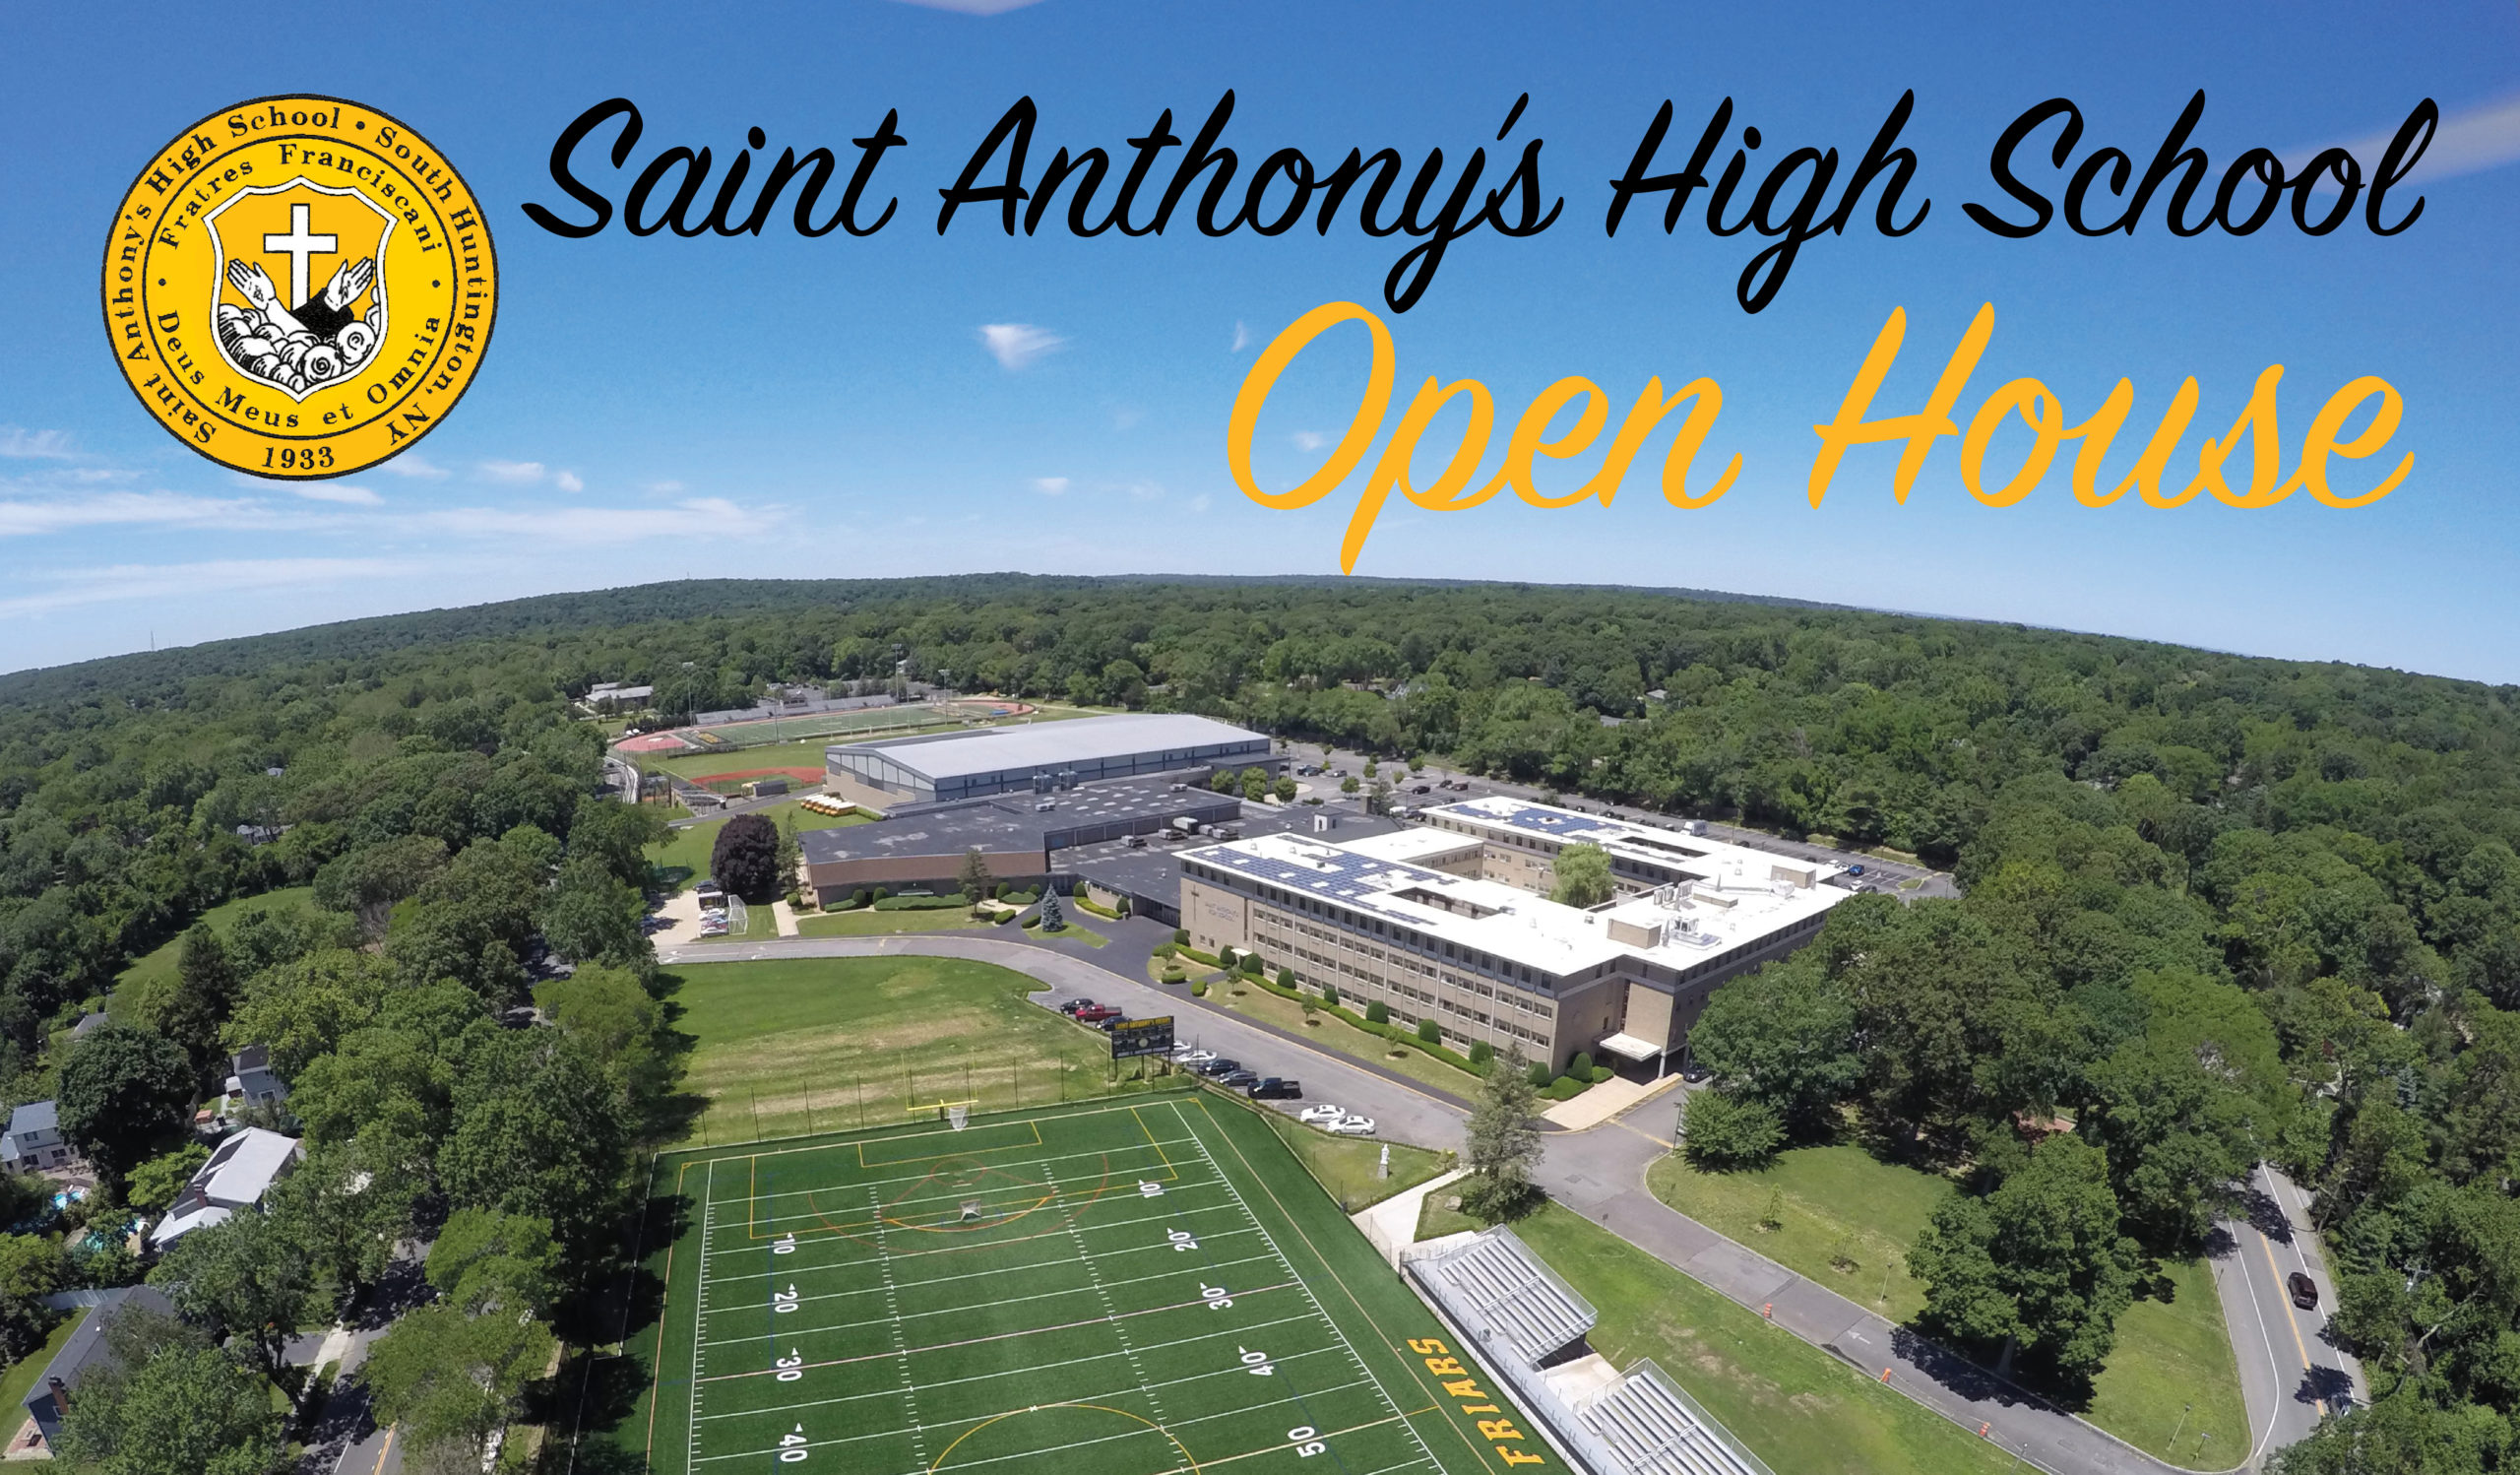 Admissions Open House Picture St. Anthony's High School